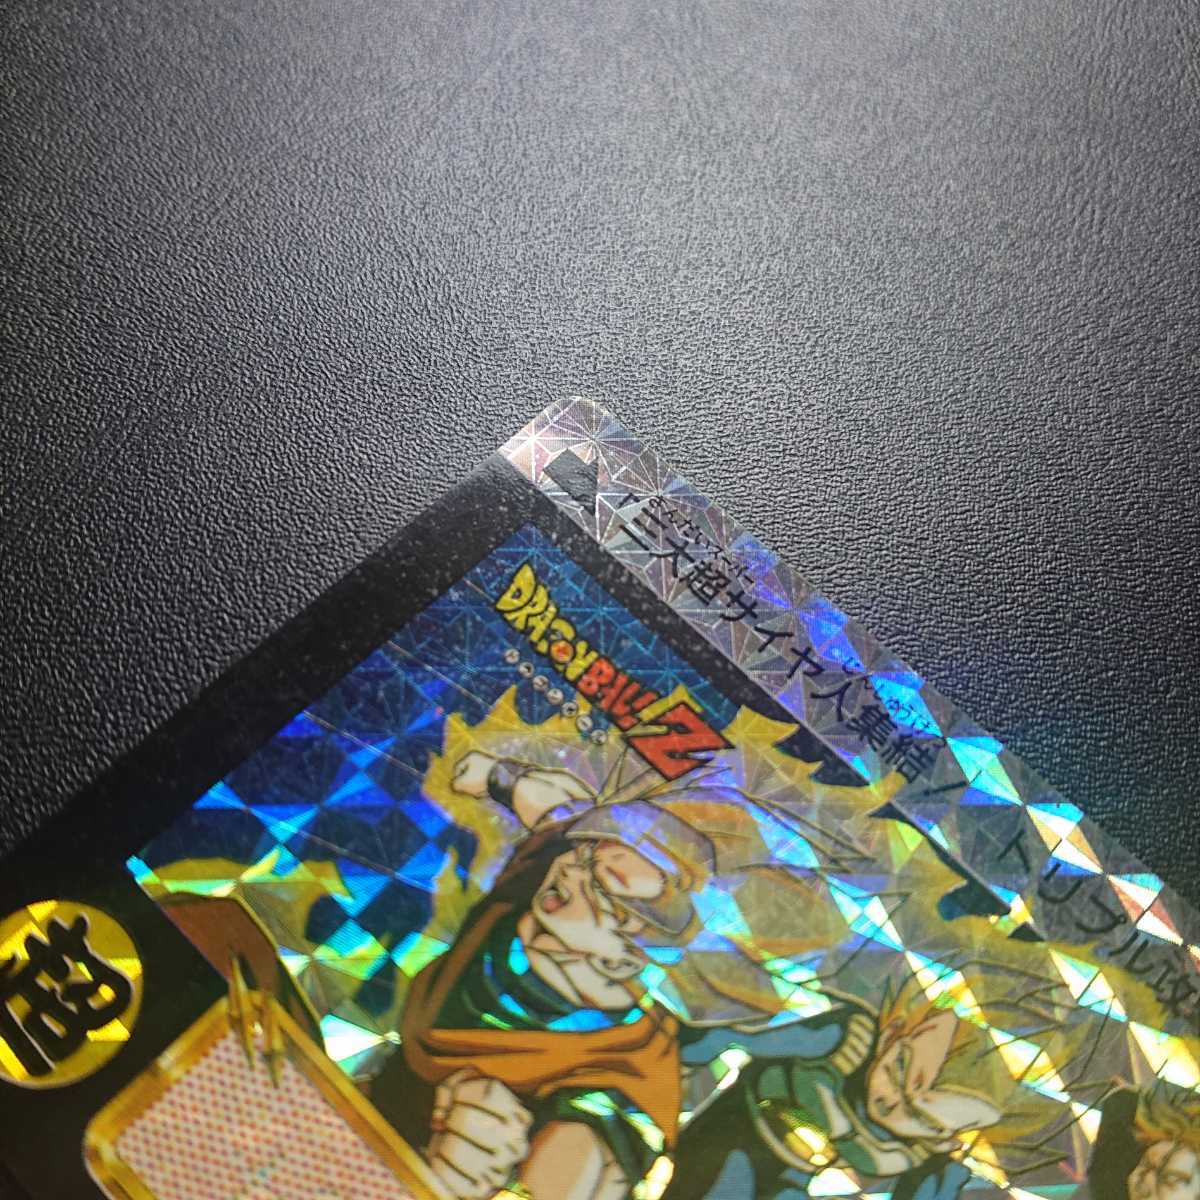  complete not yet to peeled off goods Dragon Ball Z Carddas book@.No.500 three large super rhinoceros ya person 